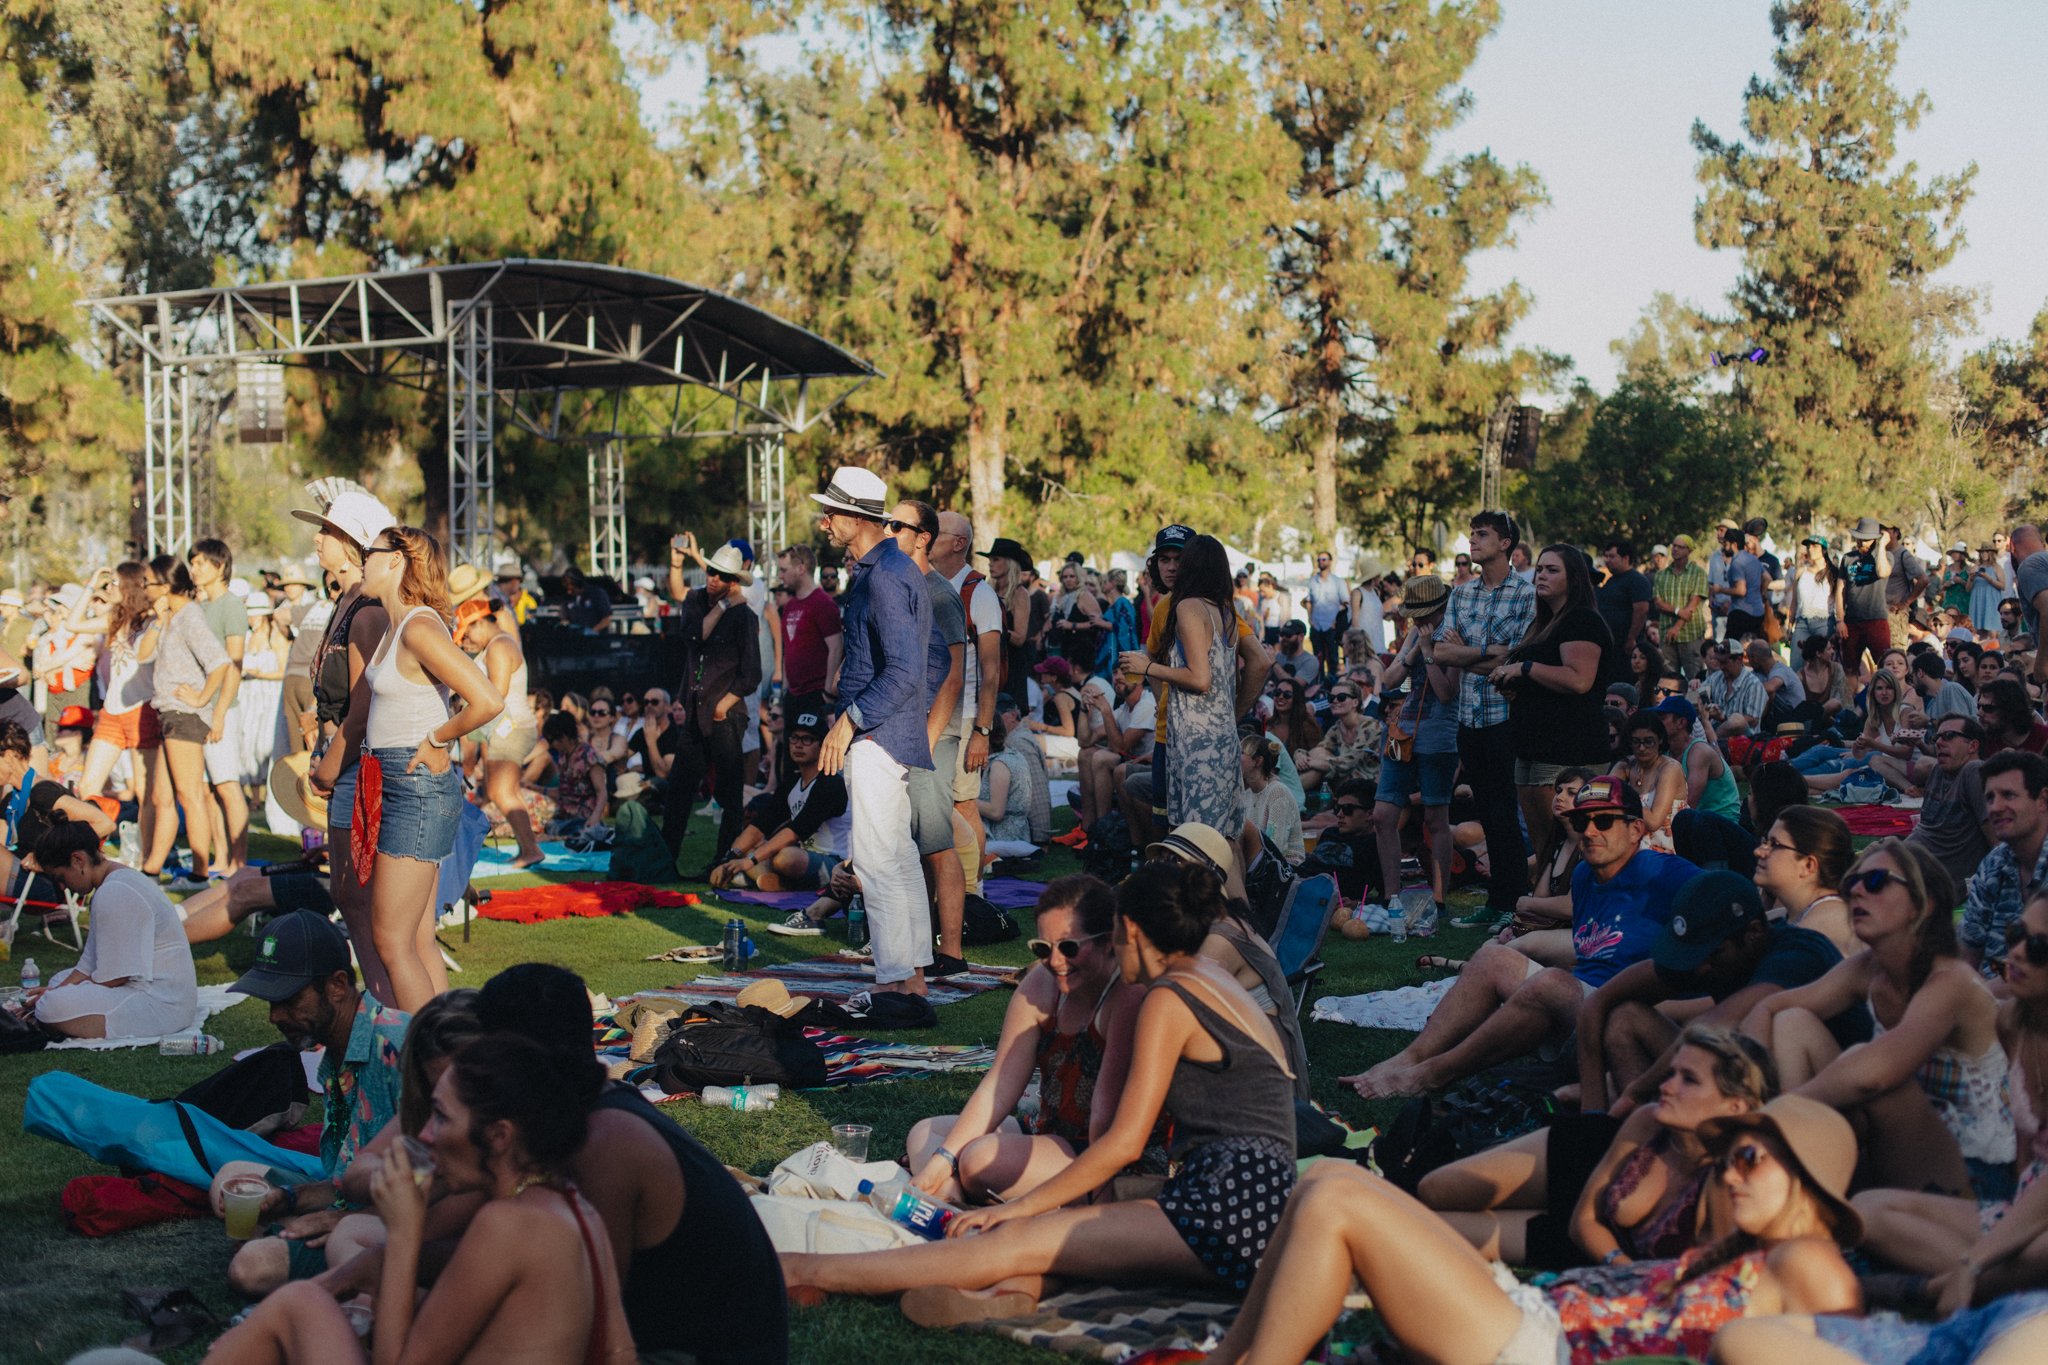 Our best photos from the inaugural Arroyo Seco Weekend music fest